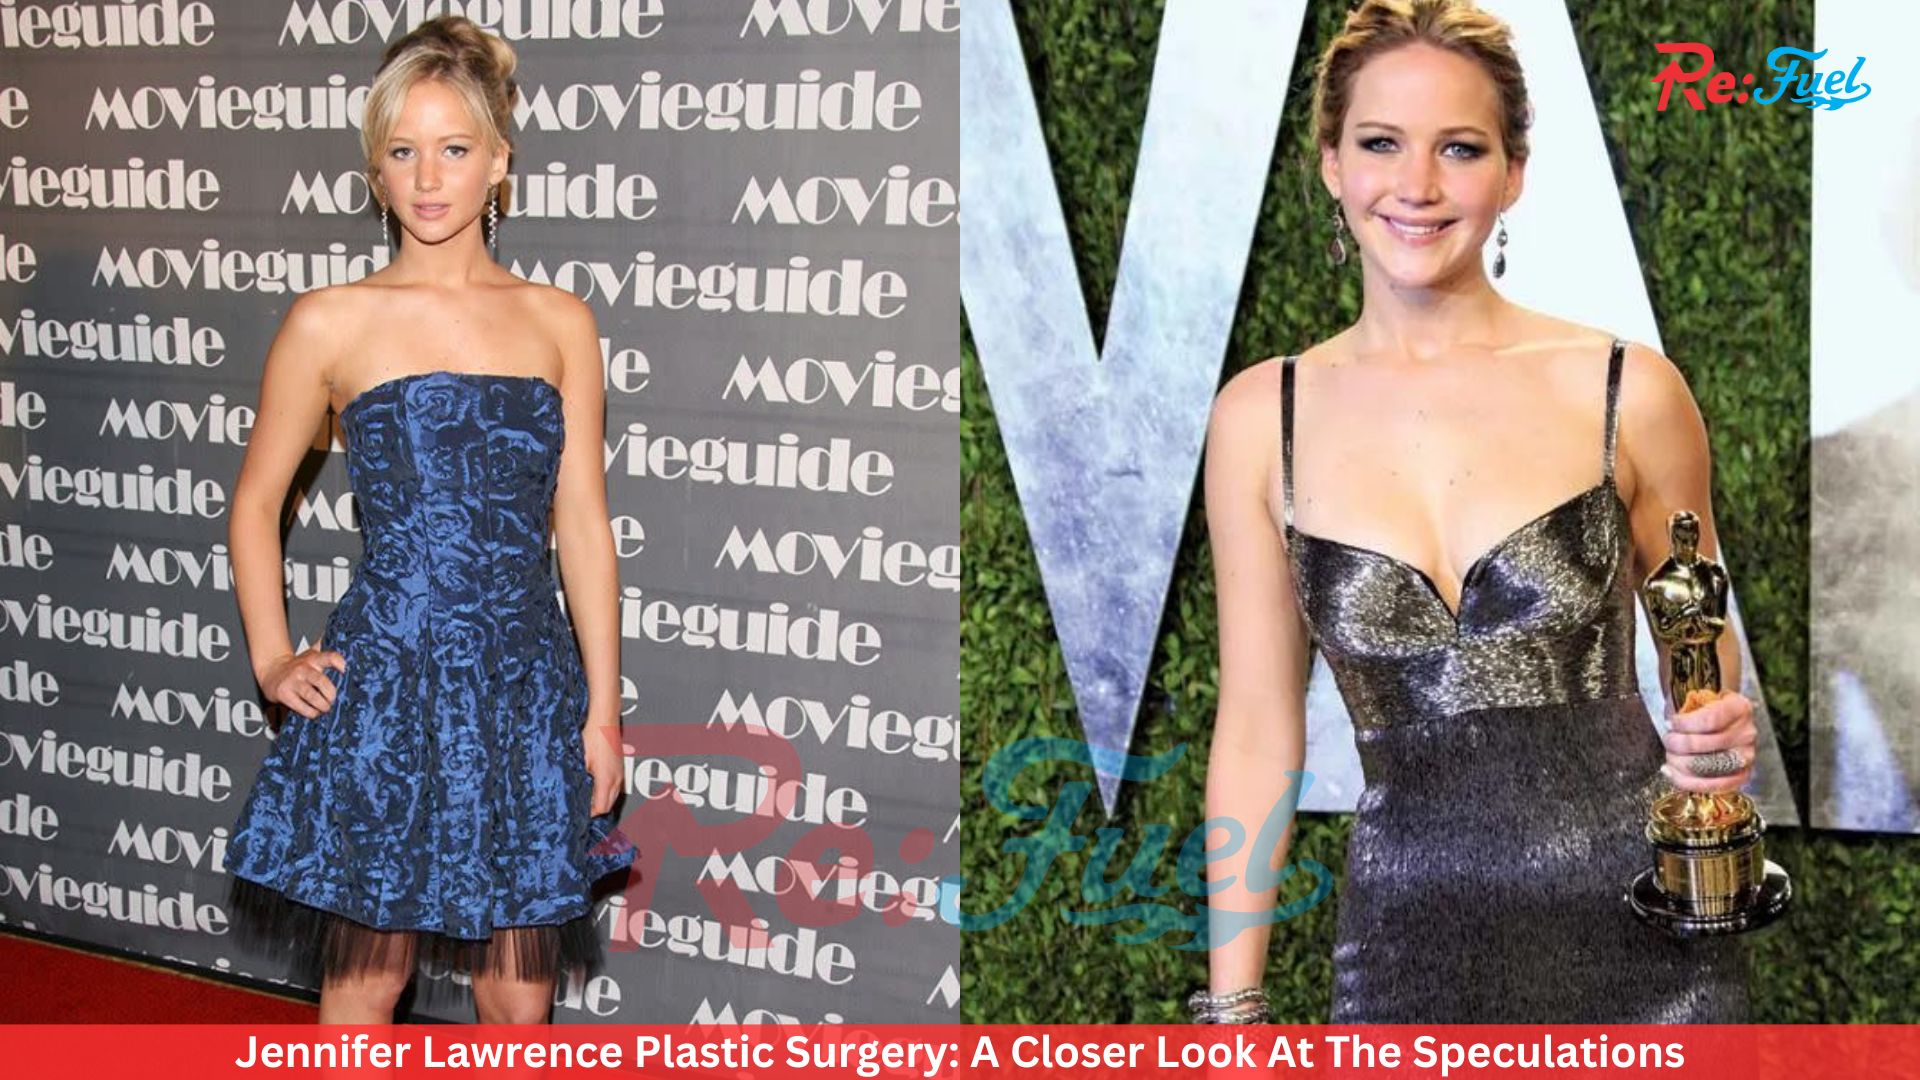 Jennifer Lawrence Plastic Surgery: A Closer Look At The Speculations